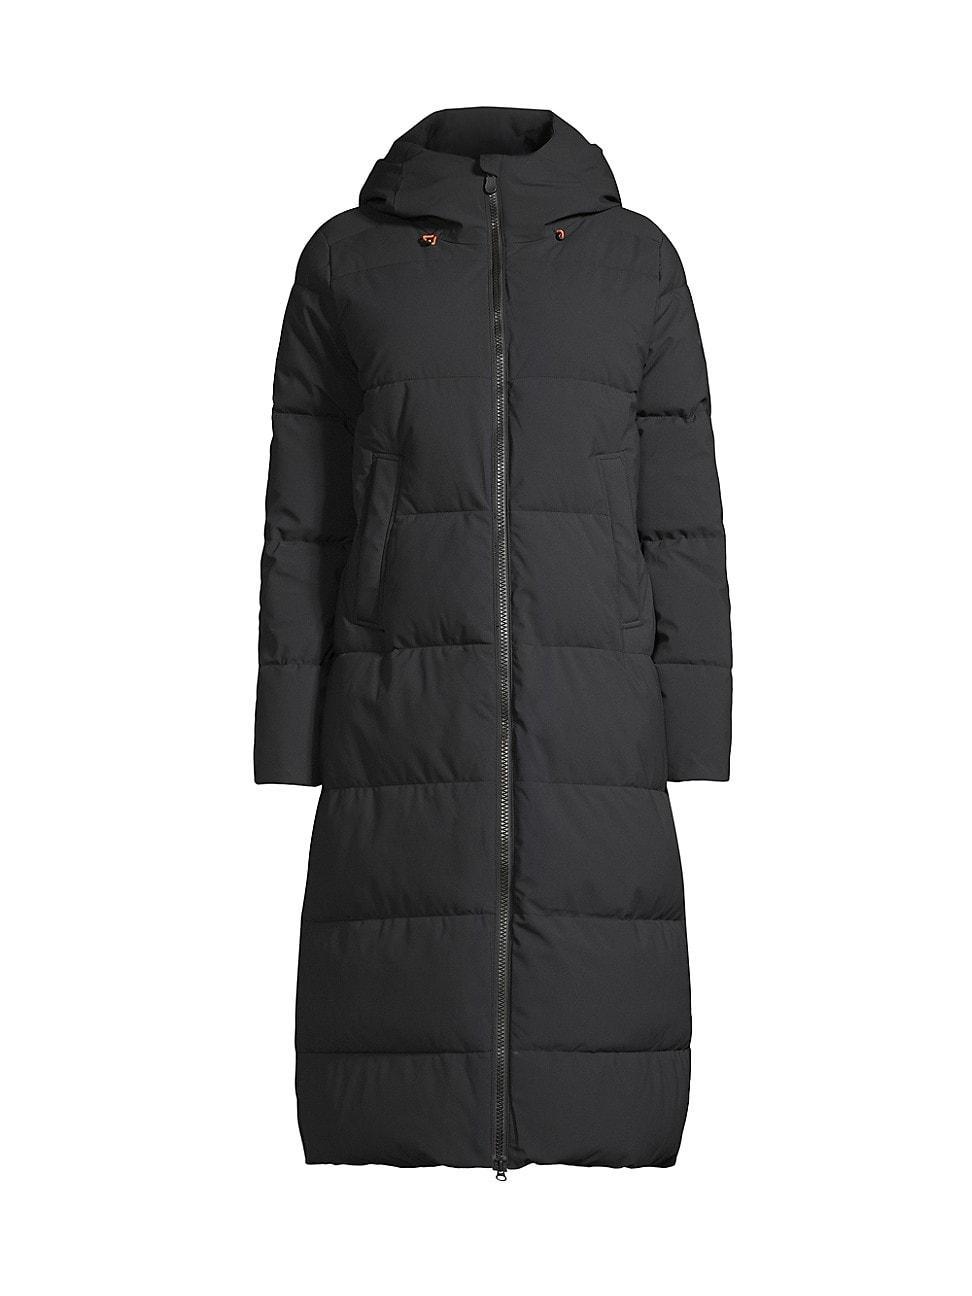 Save The Duck Missy Water Repellent Hooded Coat Product Image